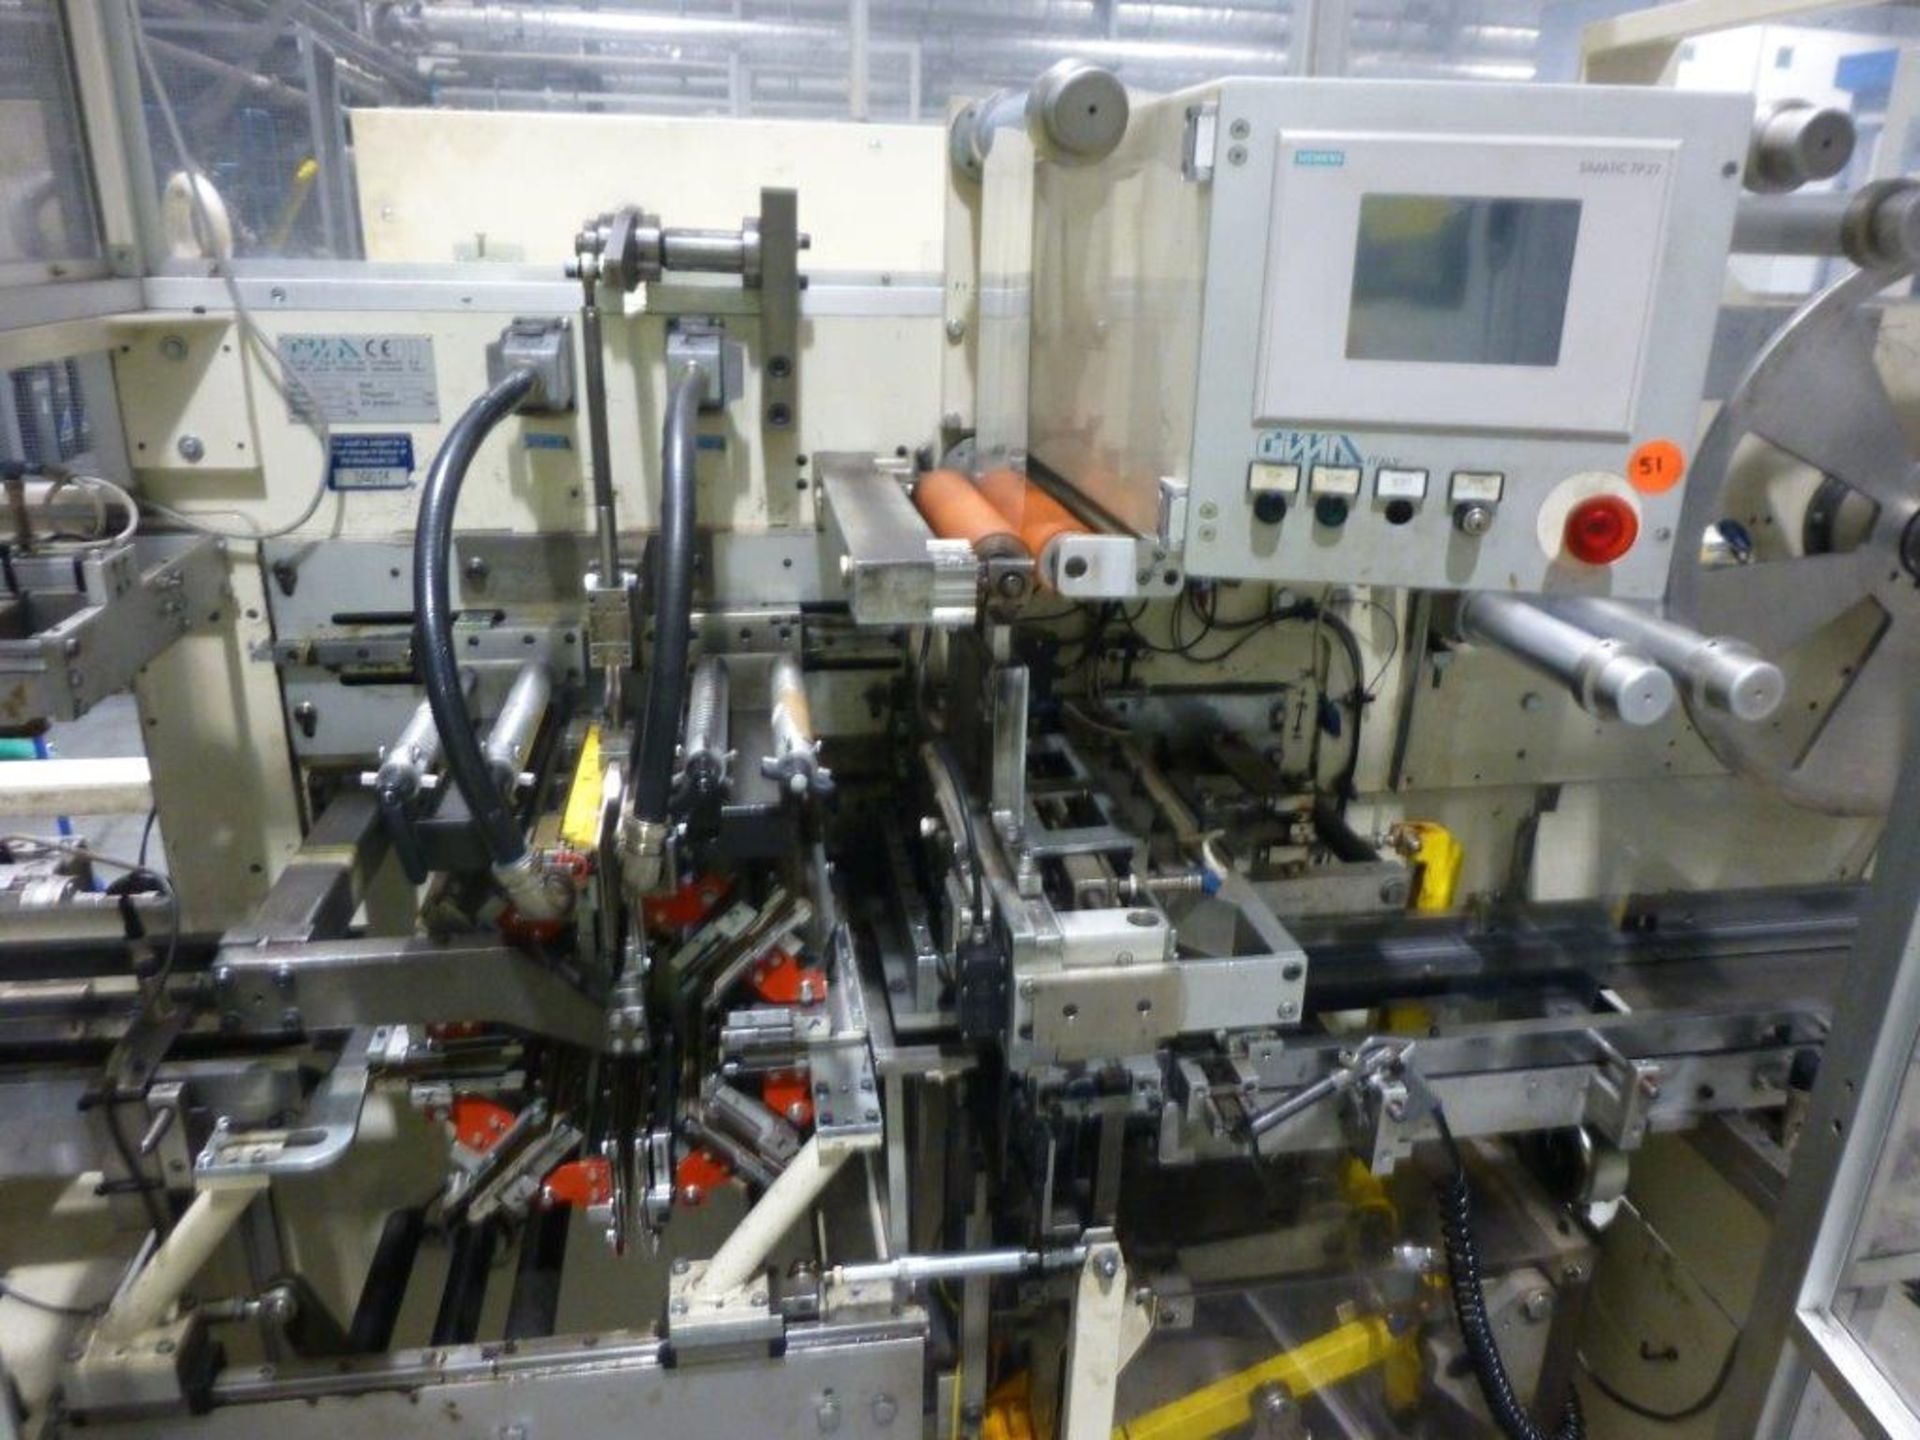 GIMA Type 884 DVD CNC Rotary Thermal Welding Machine Serial No. 88440AO (2002) with flip unit. - Image 3 of 4